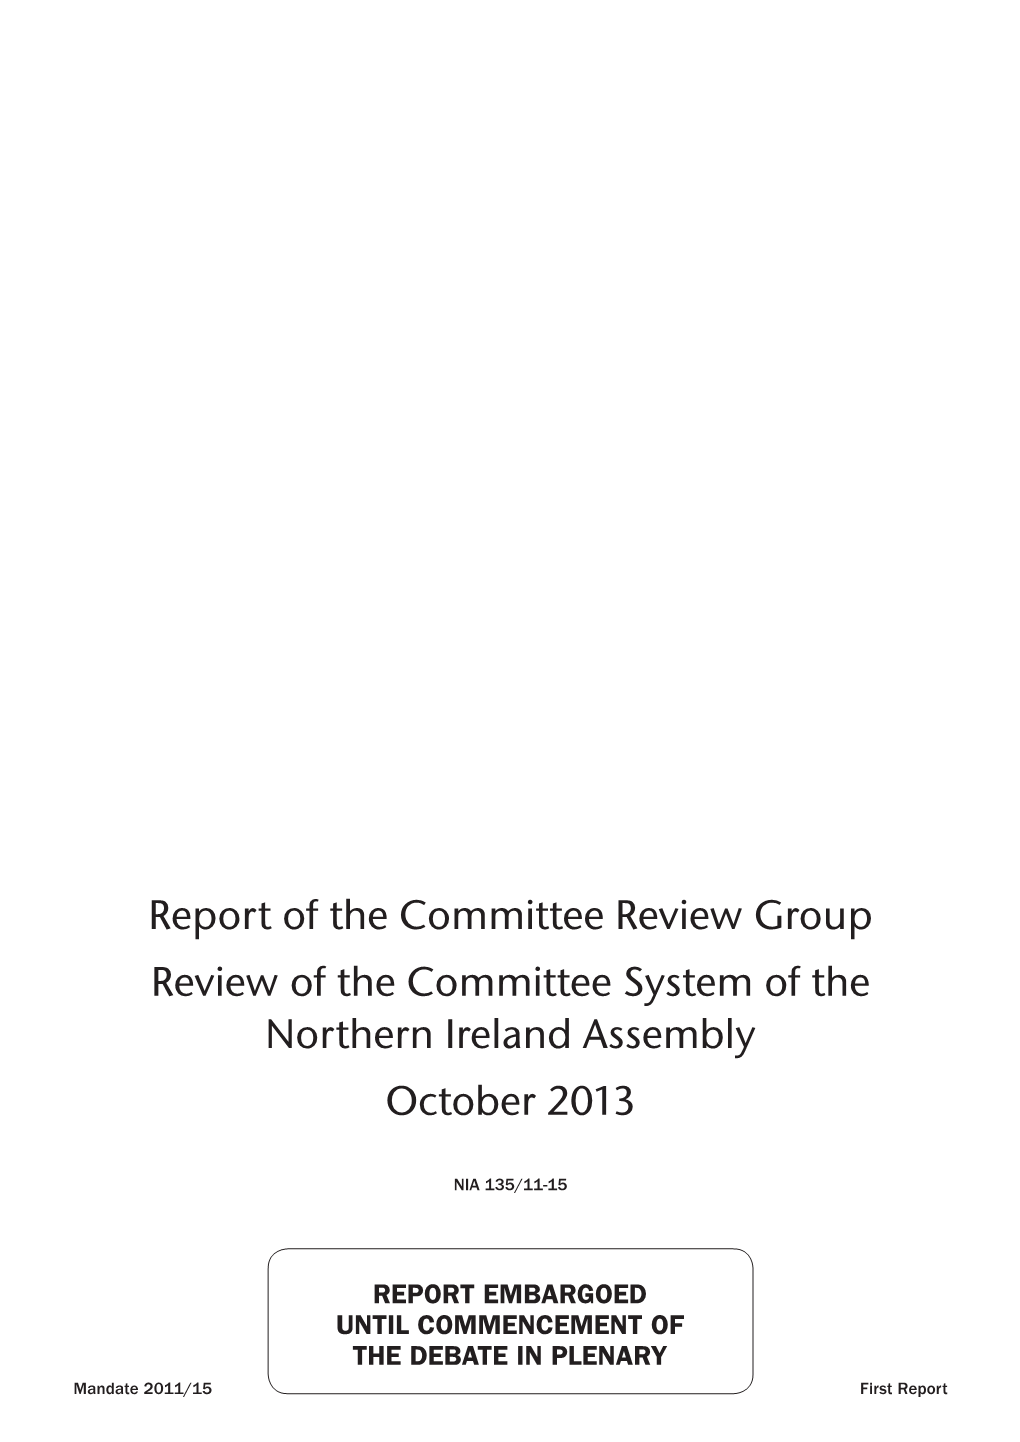 Report of the Committee Review Group Review of the Committee System of the Northern Ireland Assembly October 2013